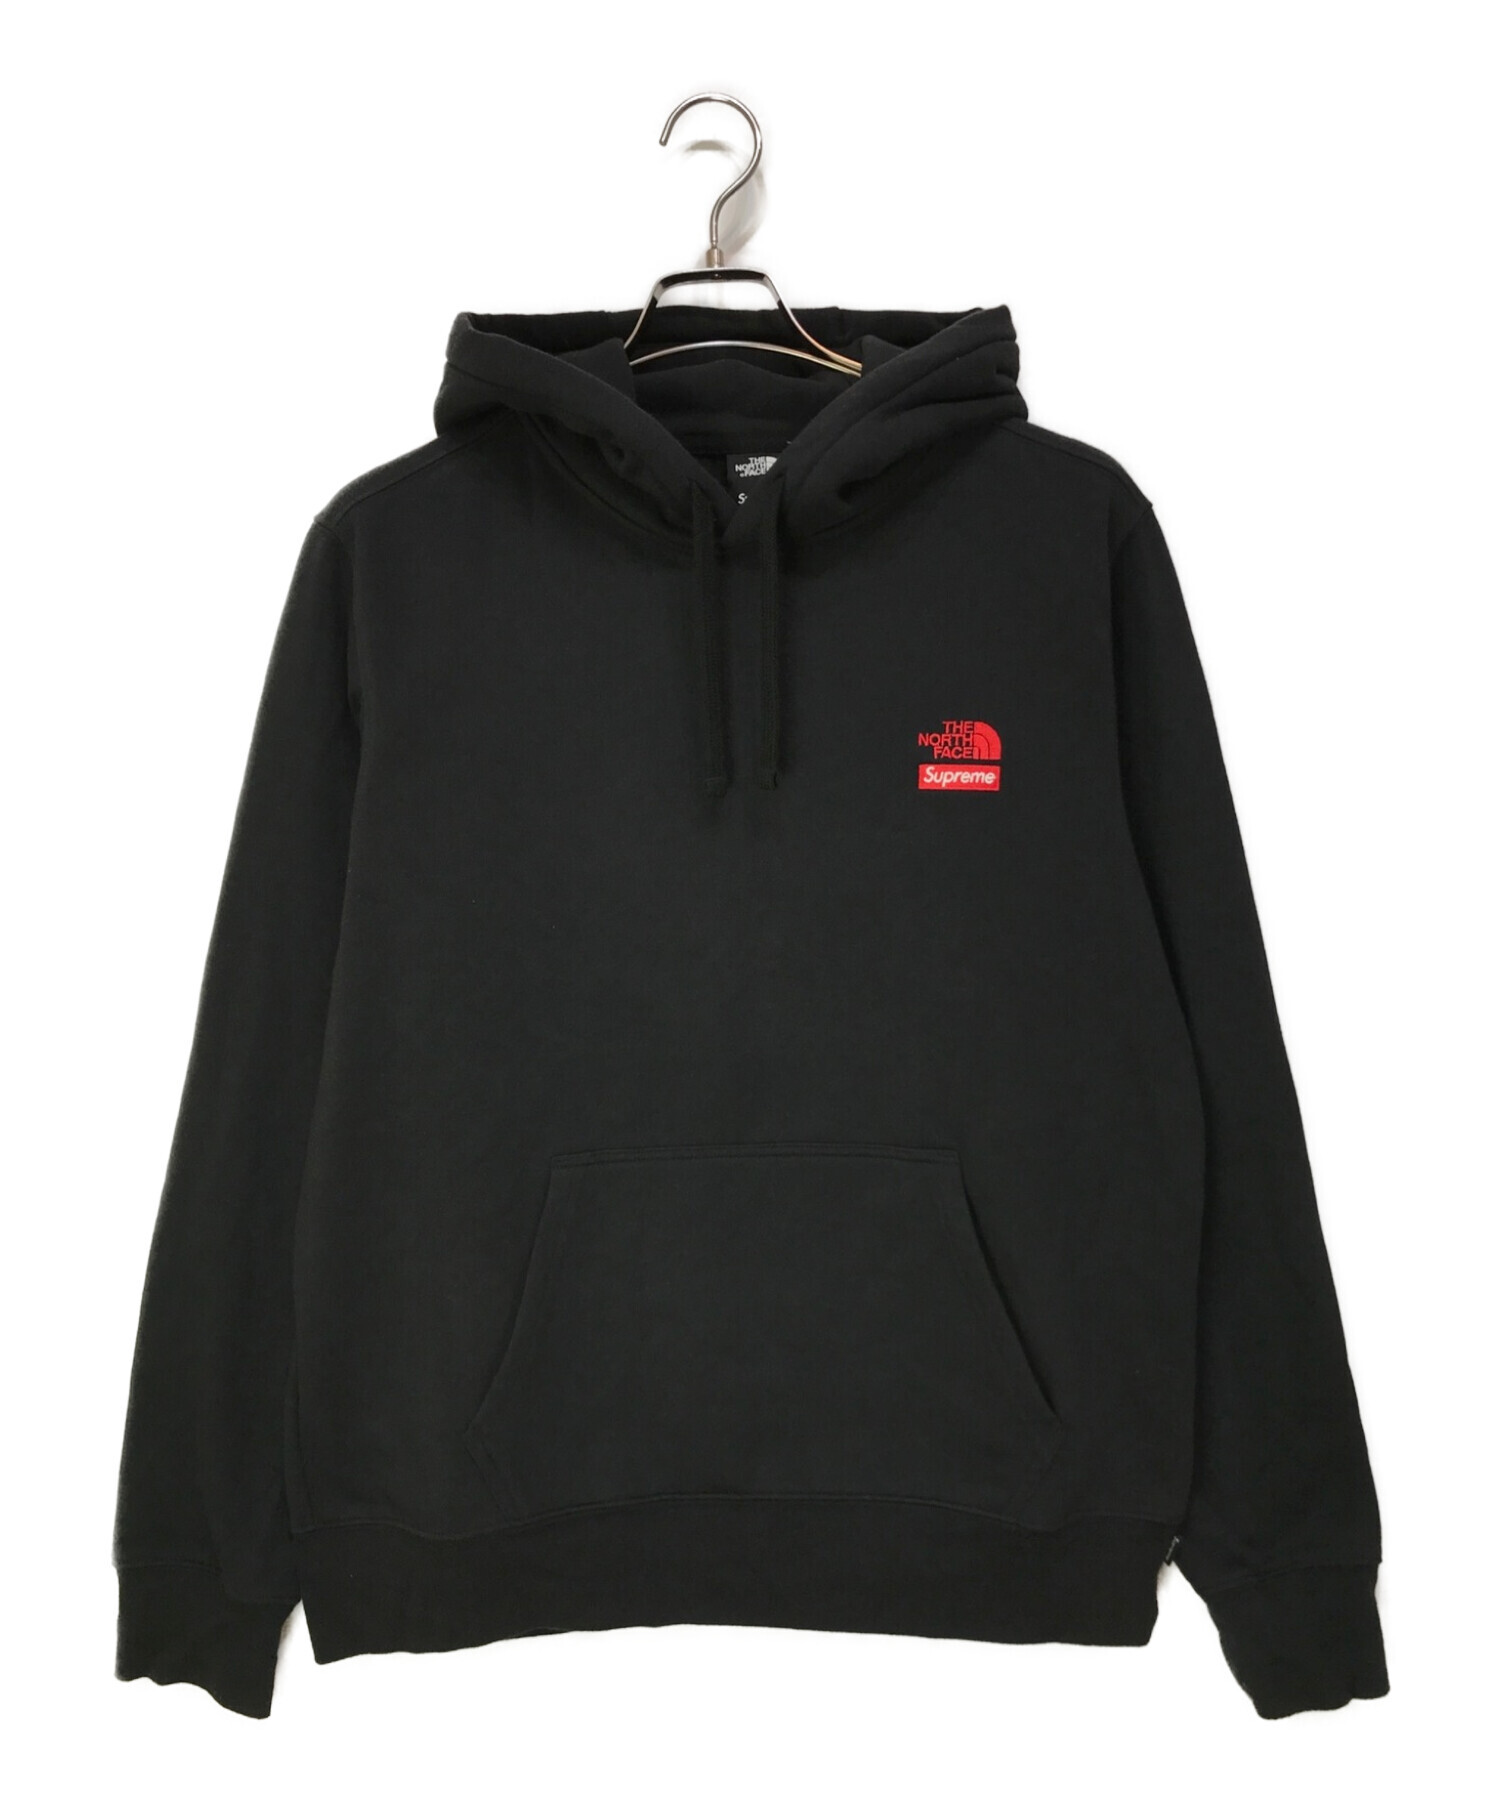 Sサイズ　Supreme The North Face Hoodie